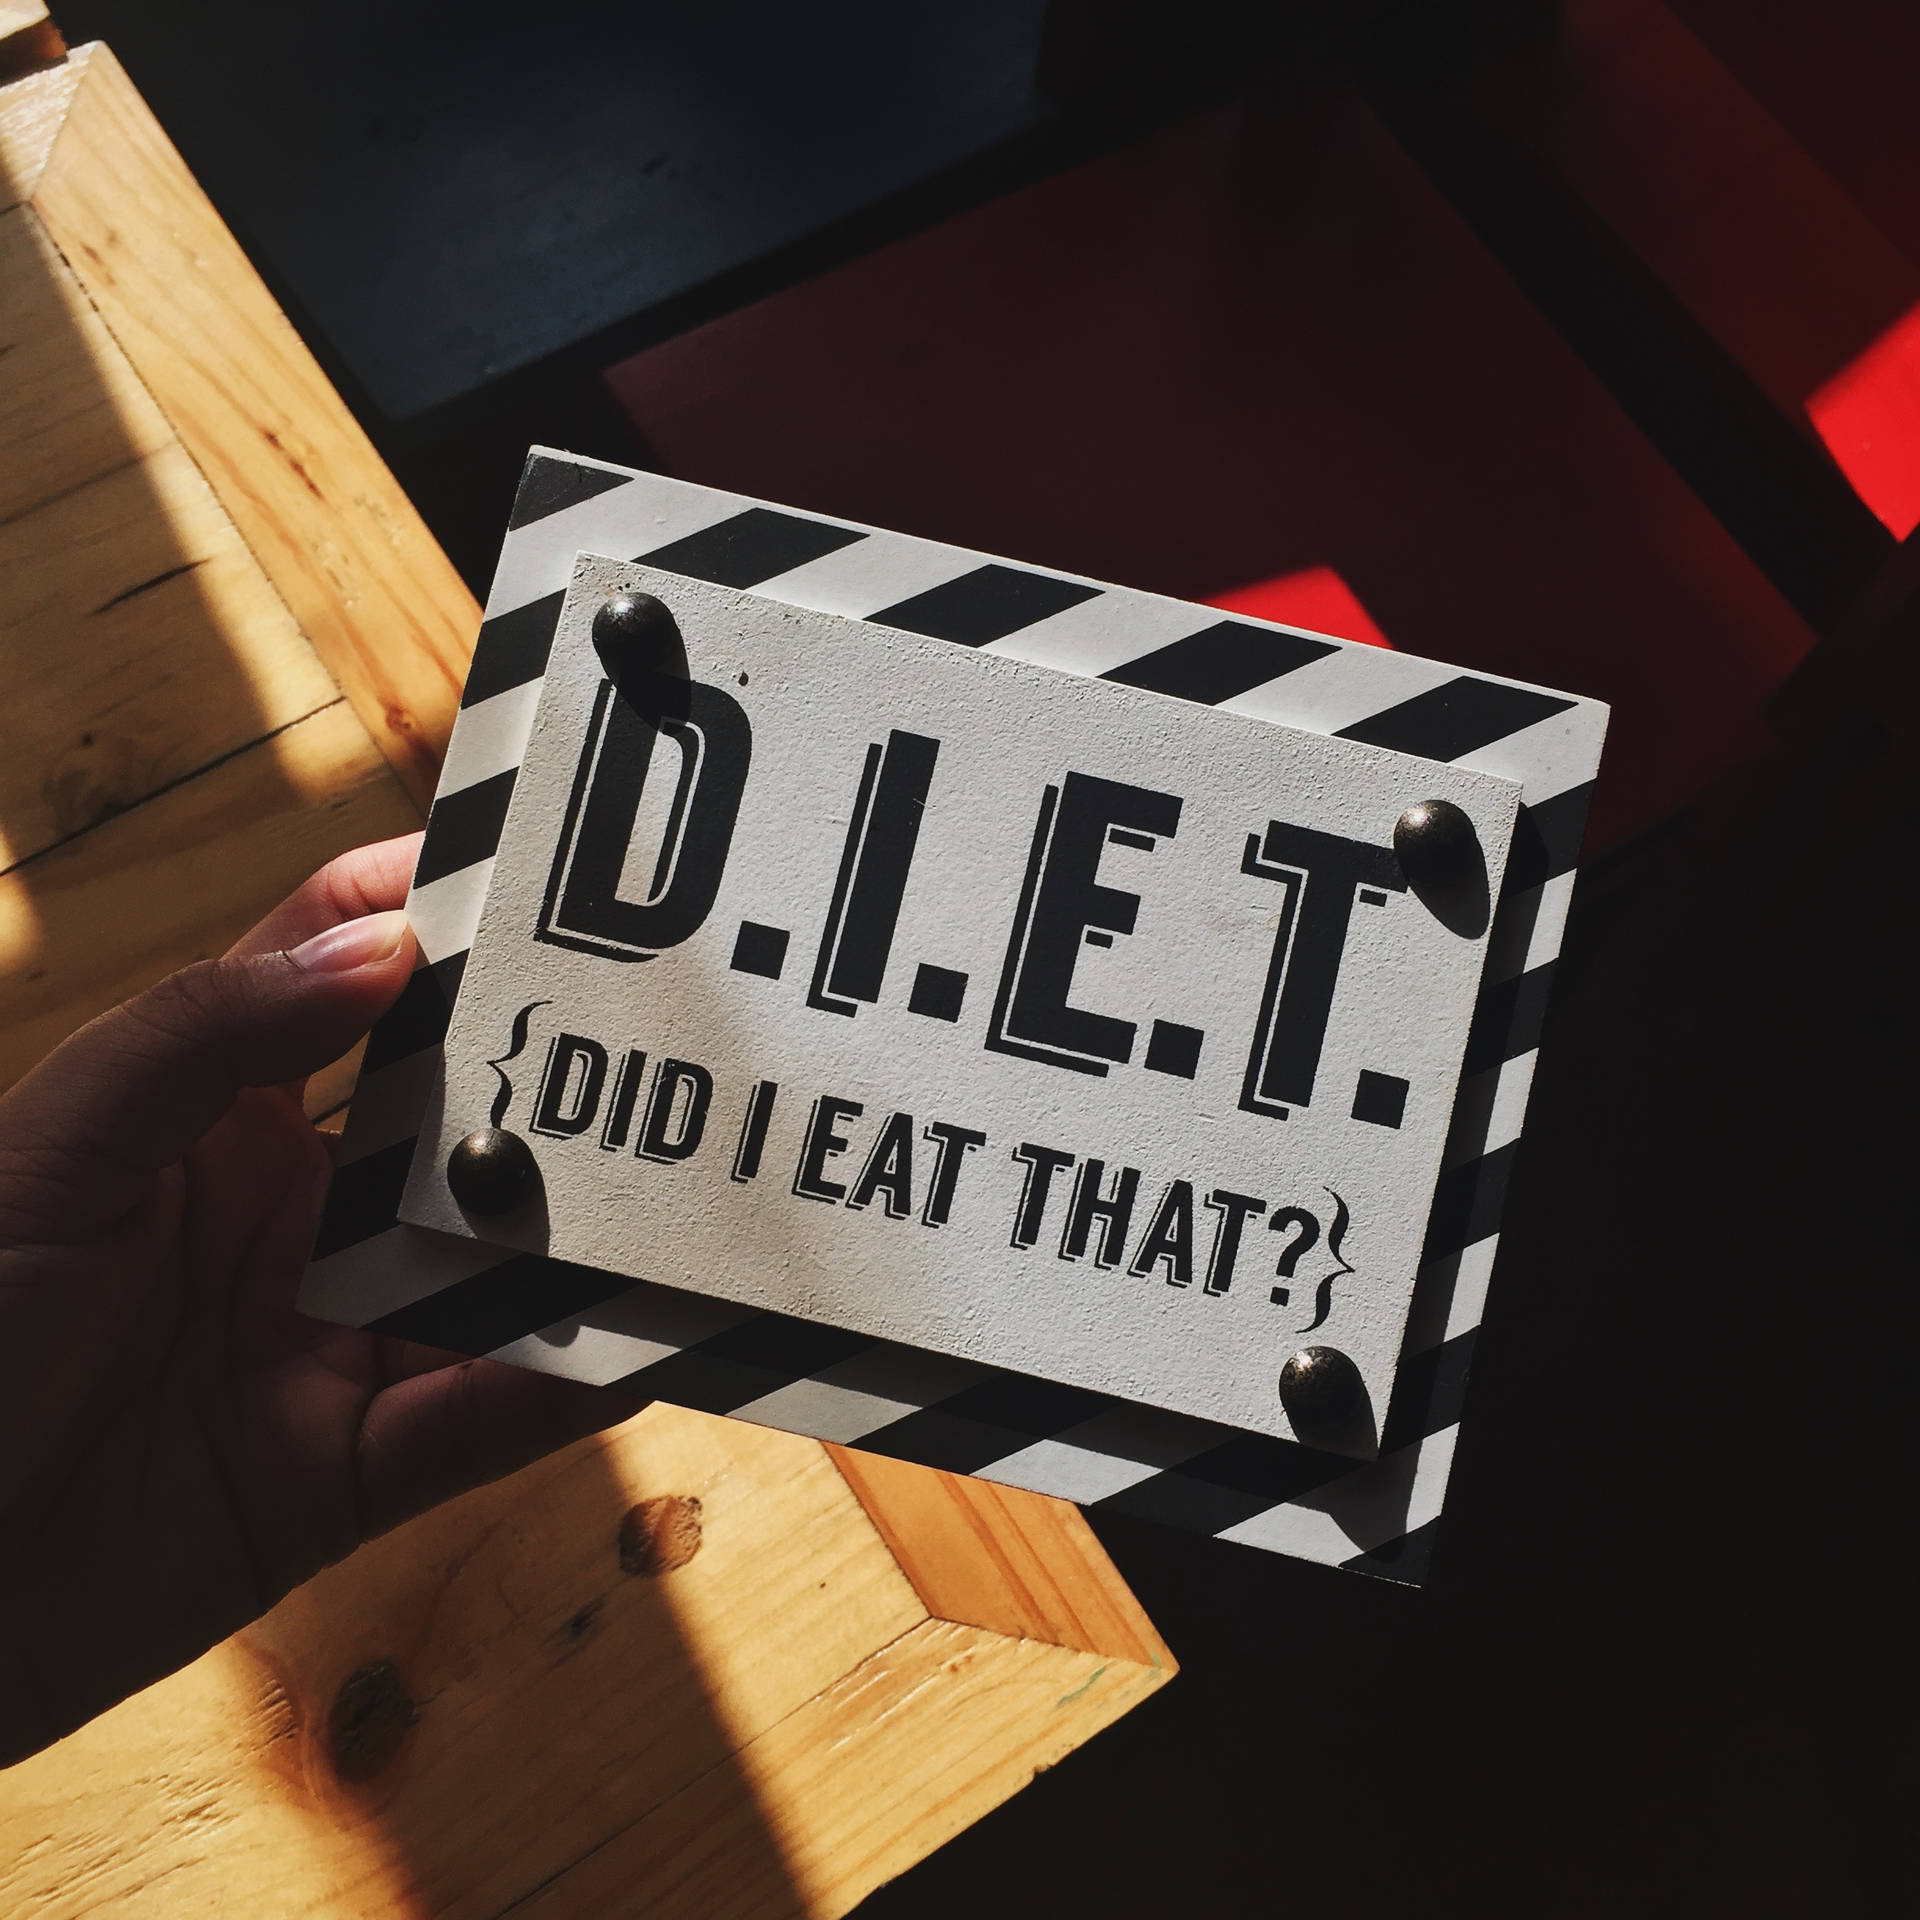 Going on a diet or not, decide for yourself! Wallpaper